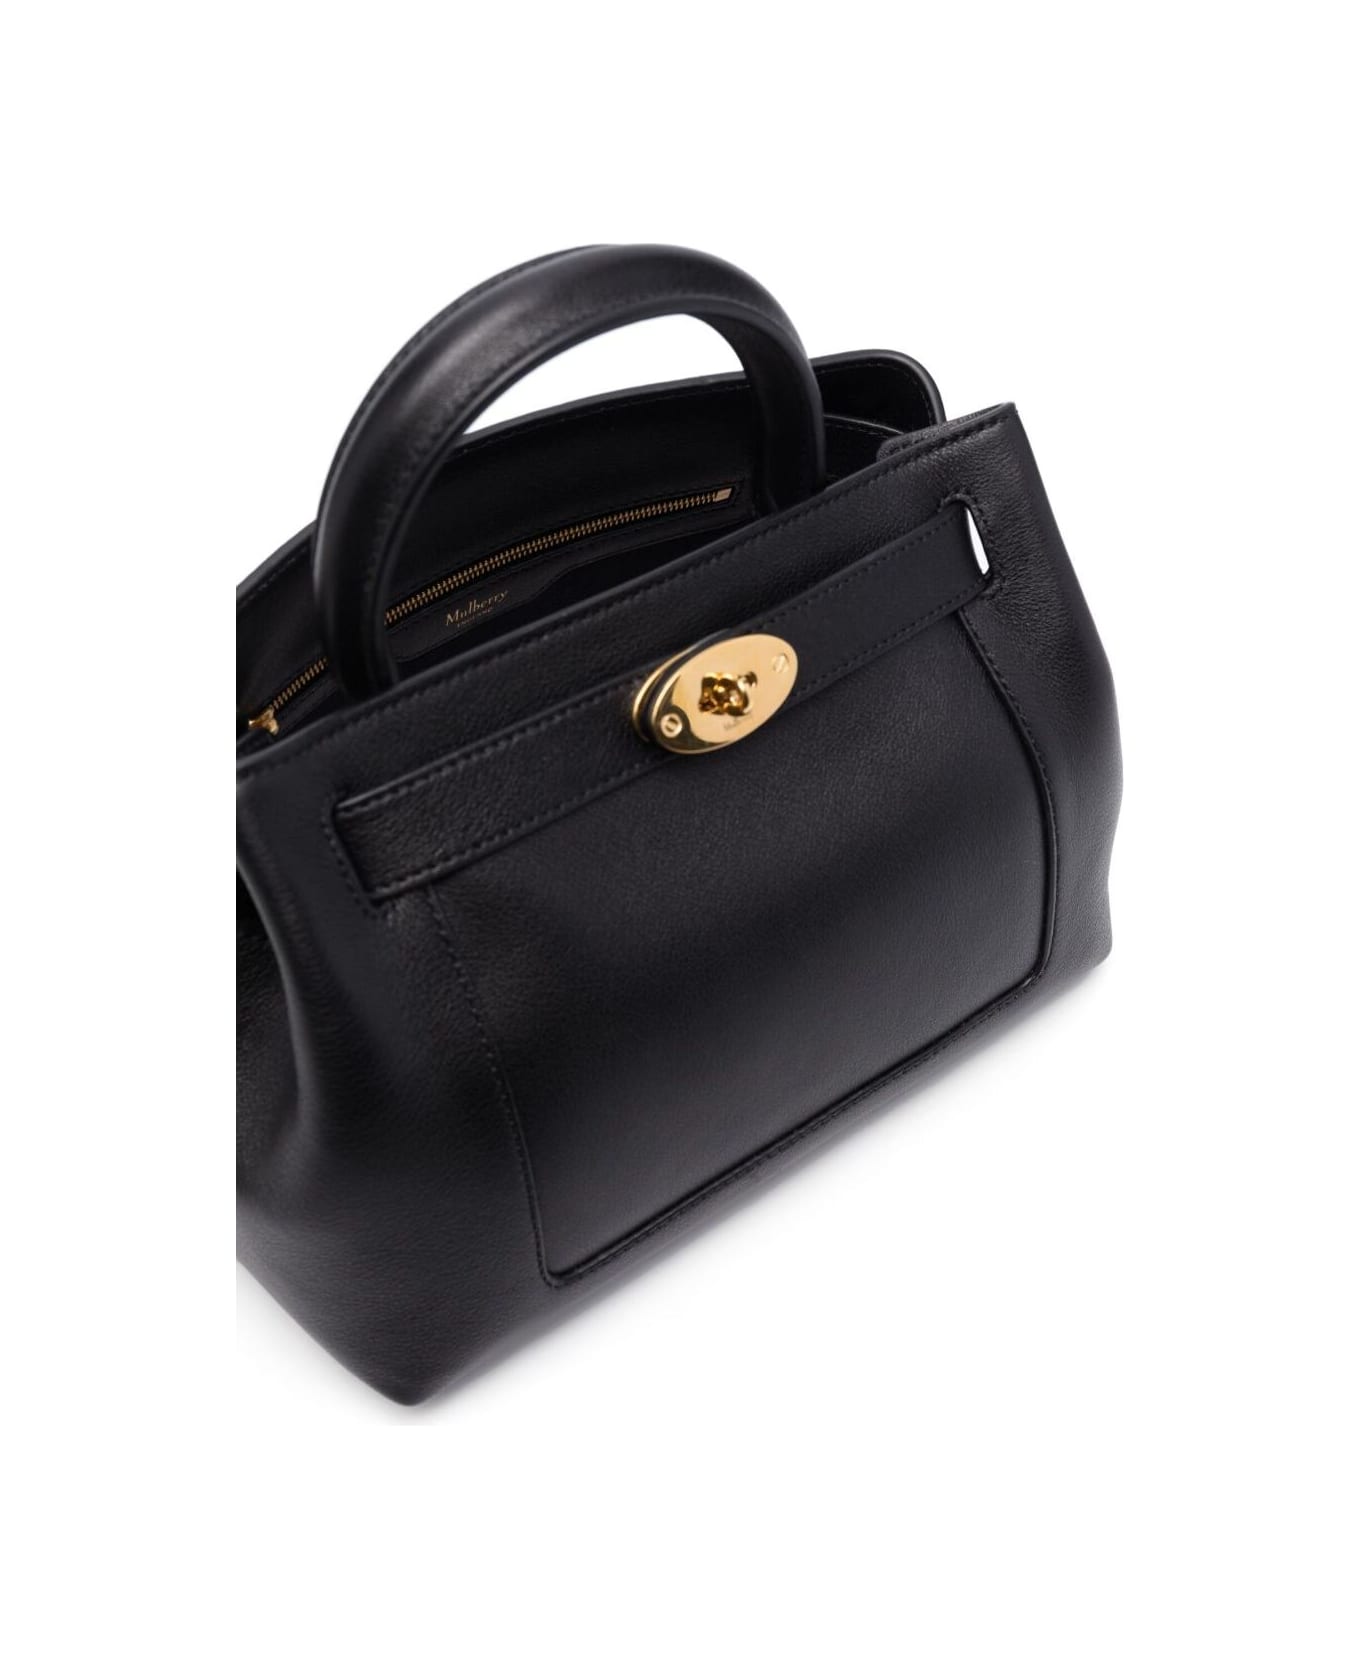 Mulberry Black Hand Bag With Single Handle And Gold-tone Details In Leather Woman - Black トートバッグ